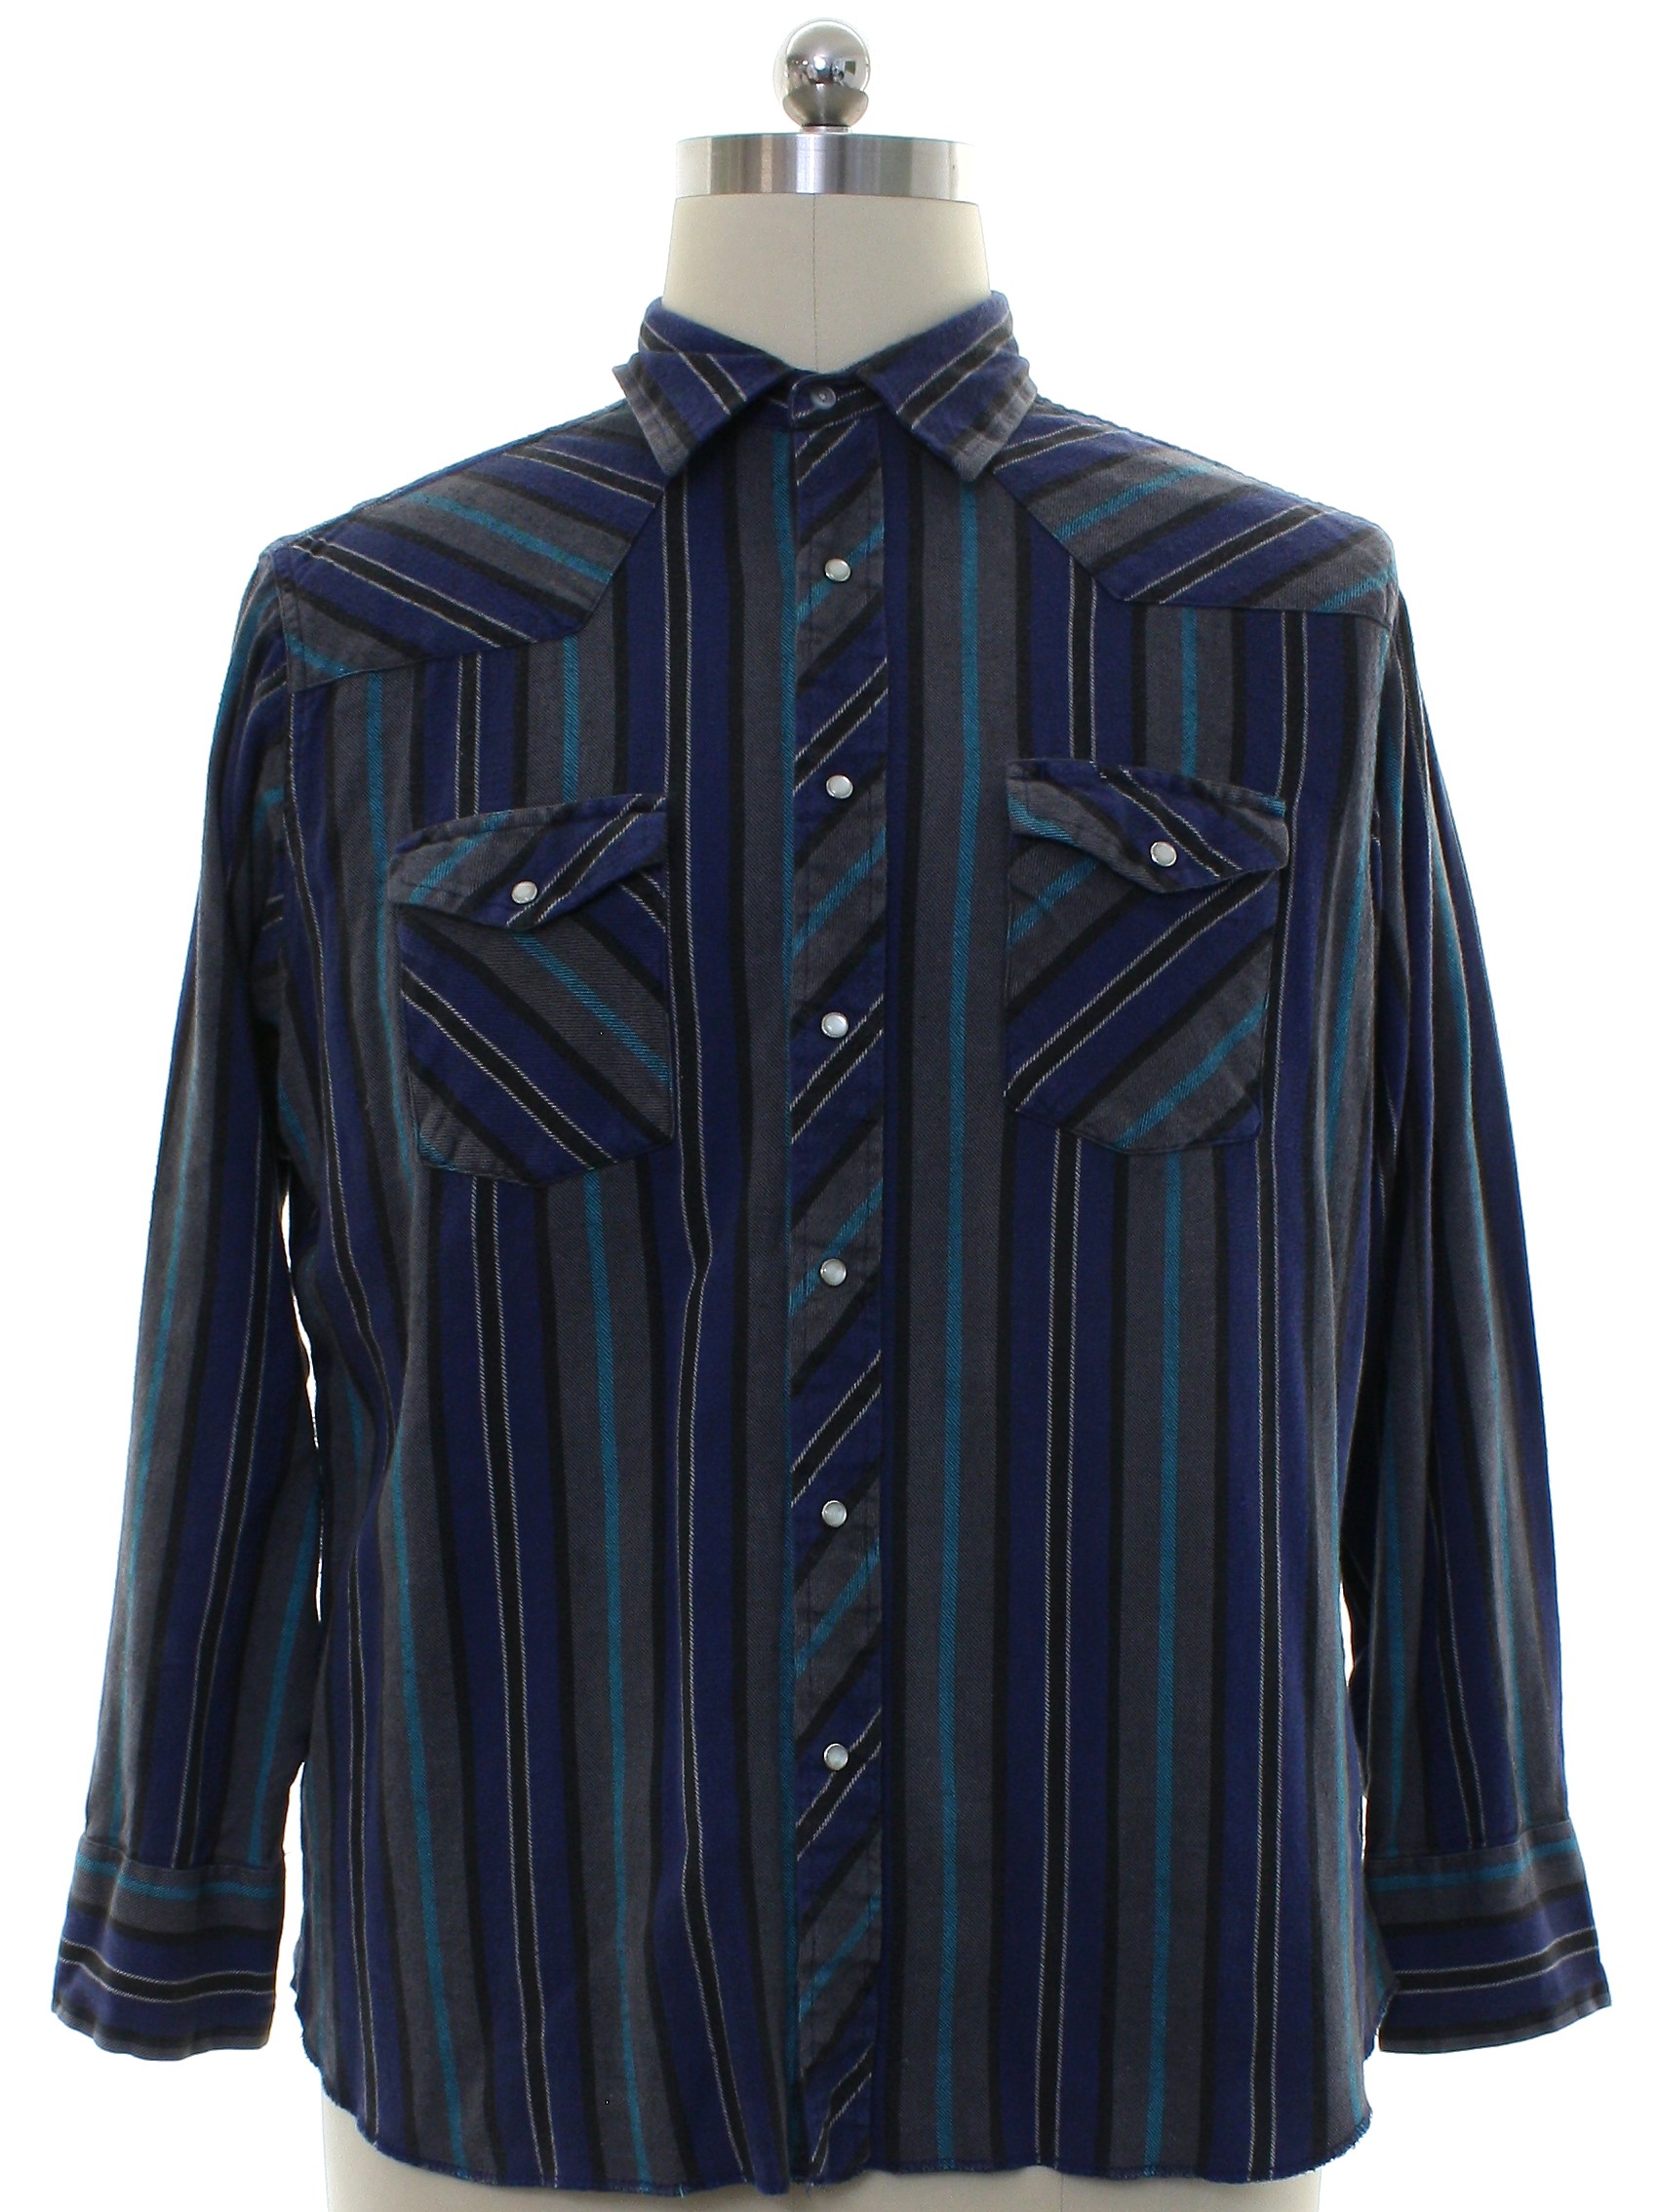 Western Shirt: 90s -Wrangler- Mens gray, blue, black, and turquoise ...